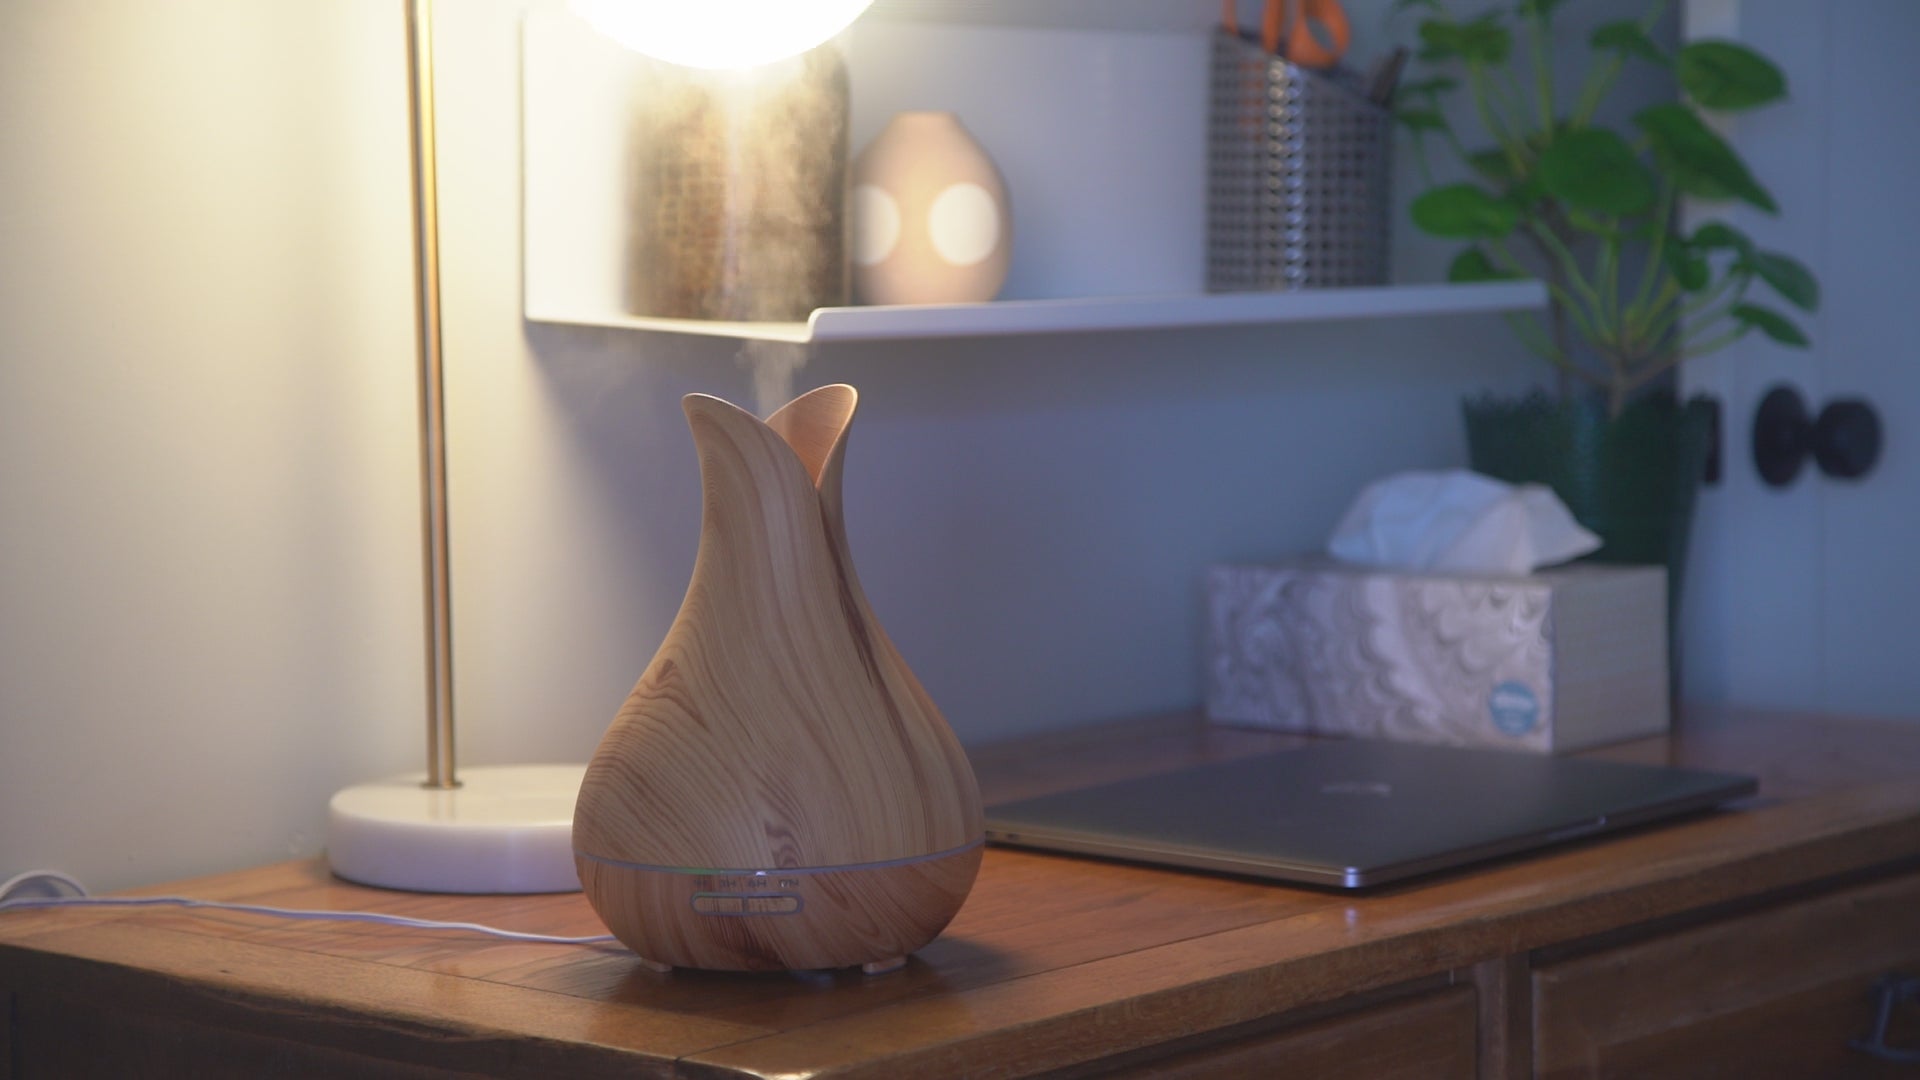 Essential Oil Diffuser  Ceramic & Wood with Relaxation Lamp